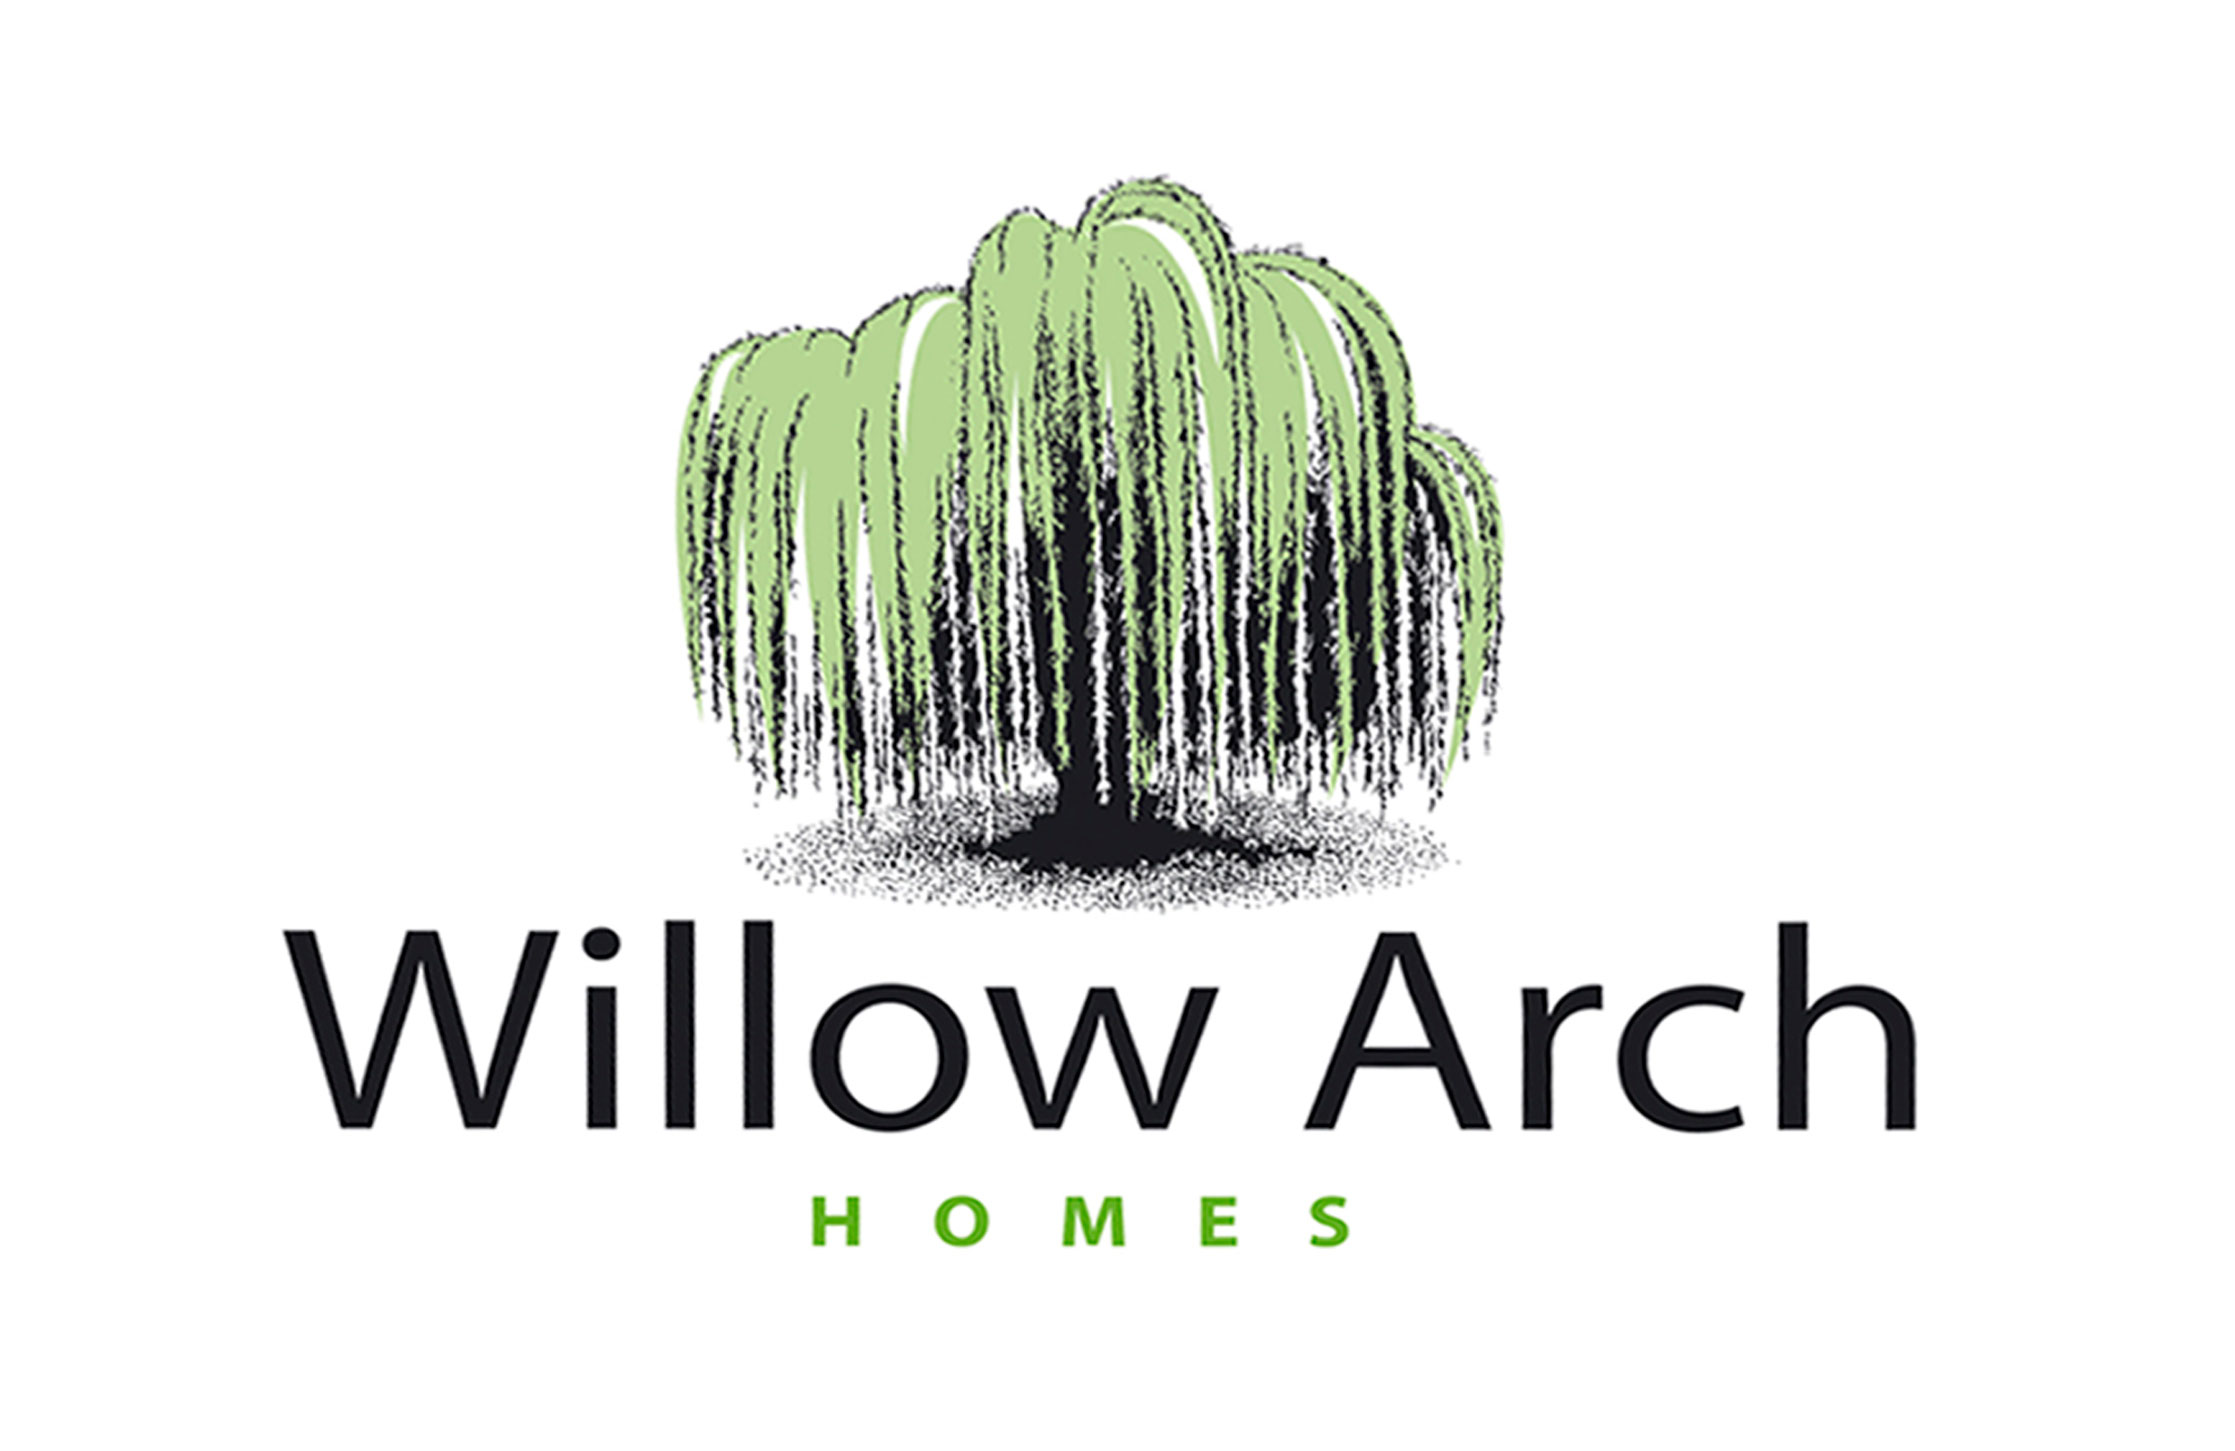 Design and artwork of proposed Willow Arch Homes corporate logo